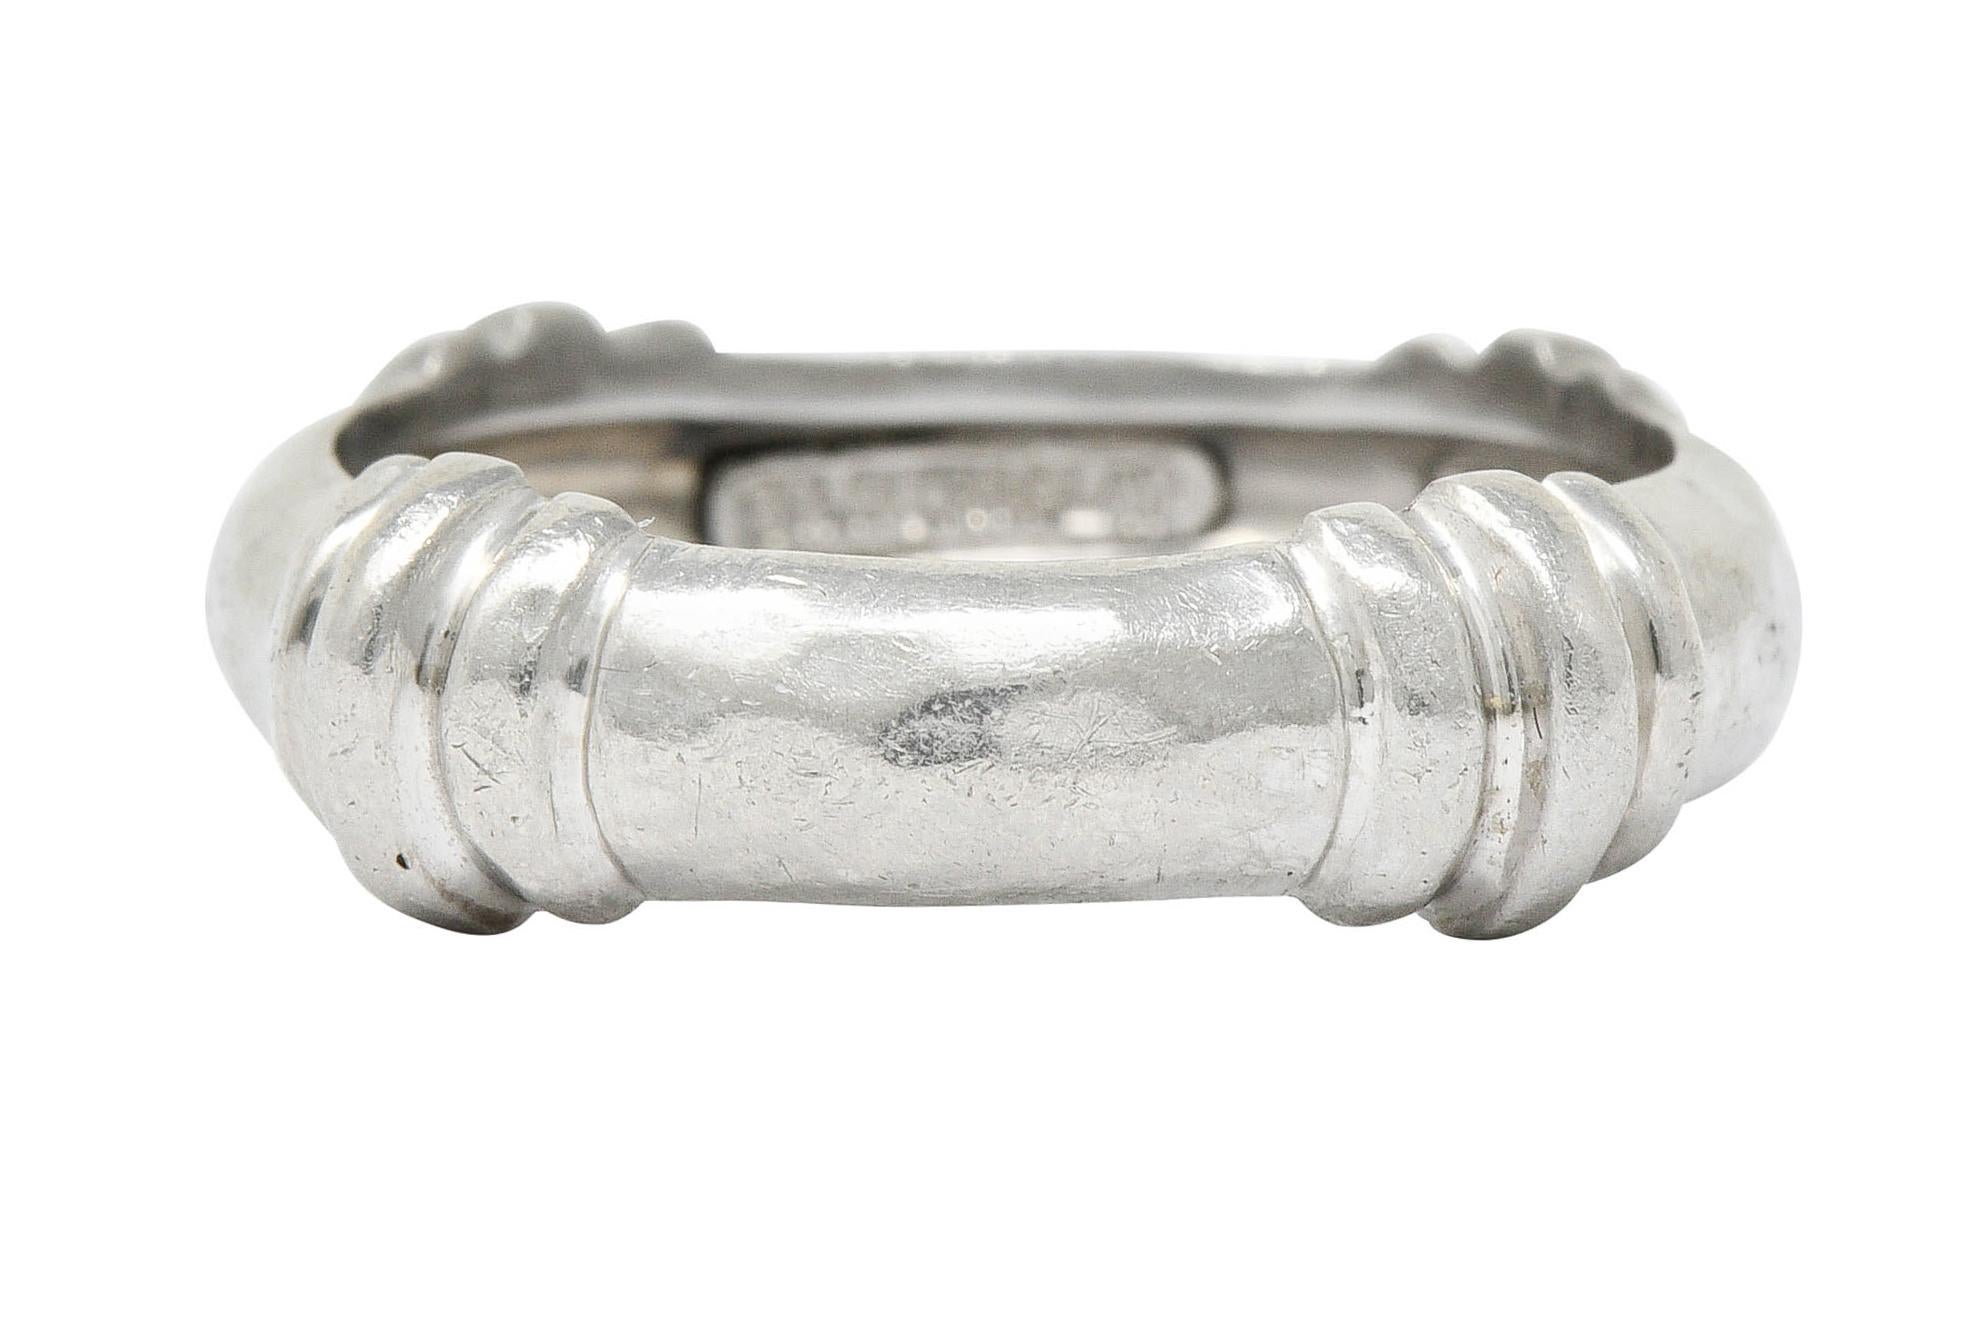 Band ring features four deeply ribbed stations

And exhibits a hammered finish

Numbered and signed Dunay for Henry Dunay

Stamped for platinum

Circa: 1990s

Ring Size: 7 3/4 & not sizable

Measures: 6.4 mm wide and sits 3.0 mm high

Total weight: